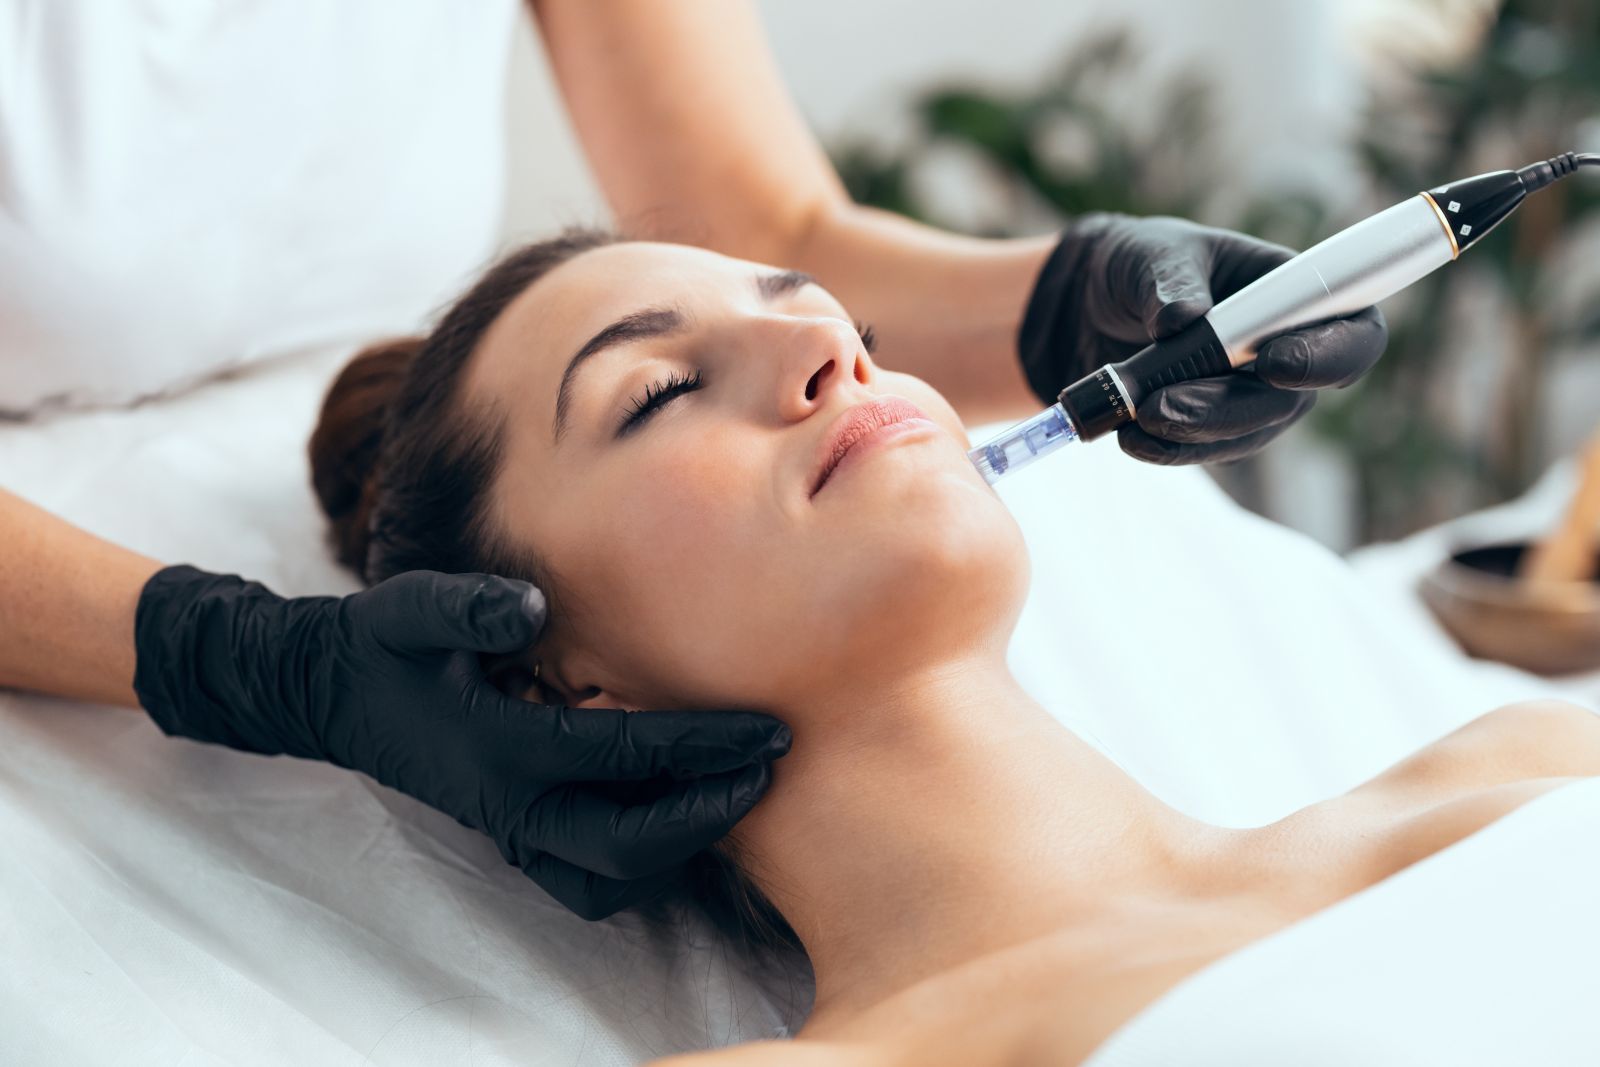 Aesthetician performs a microneedling treatment on the face of a relaxed female client in a clean, bright spa setting.